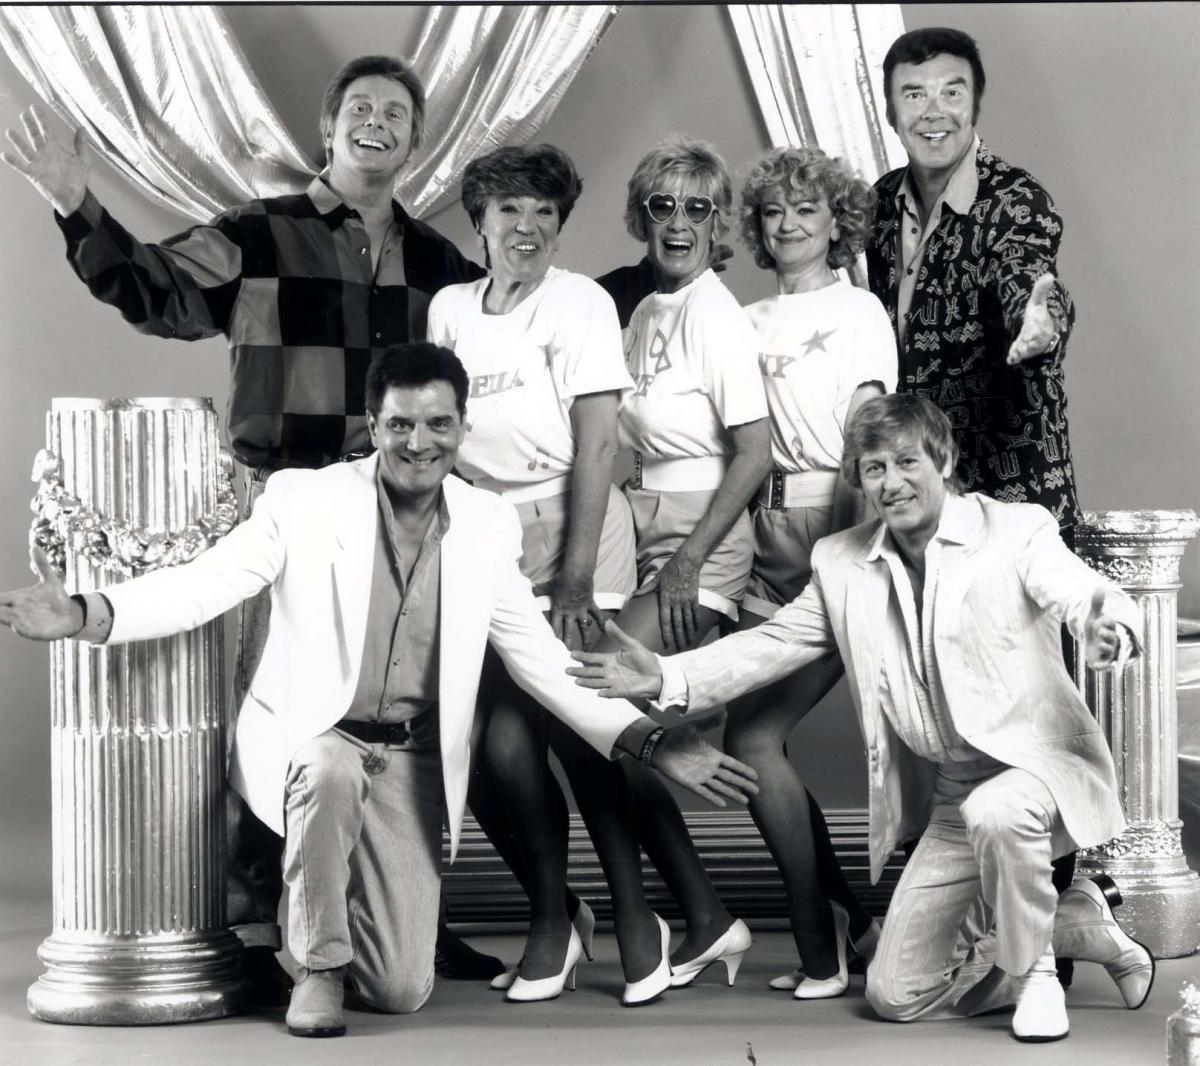 Perdiswell Leisure Centre - Rock ‘n’ roll in 1994 with Marty Wilde (rear right) and Joe Brown (rear left) and the gang